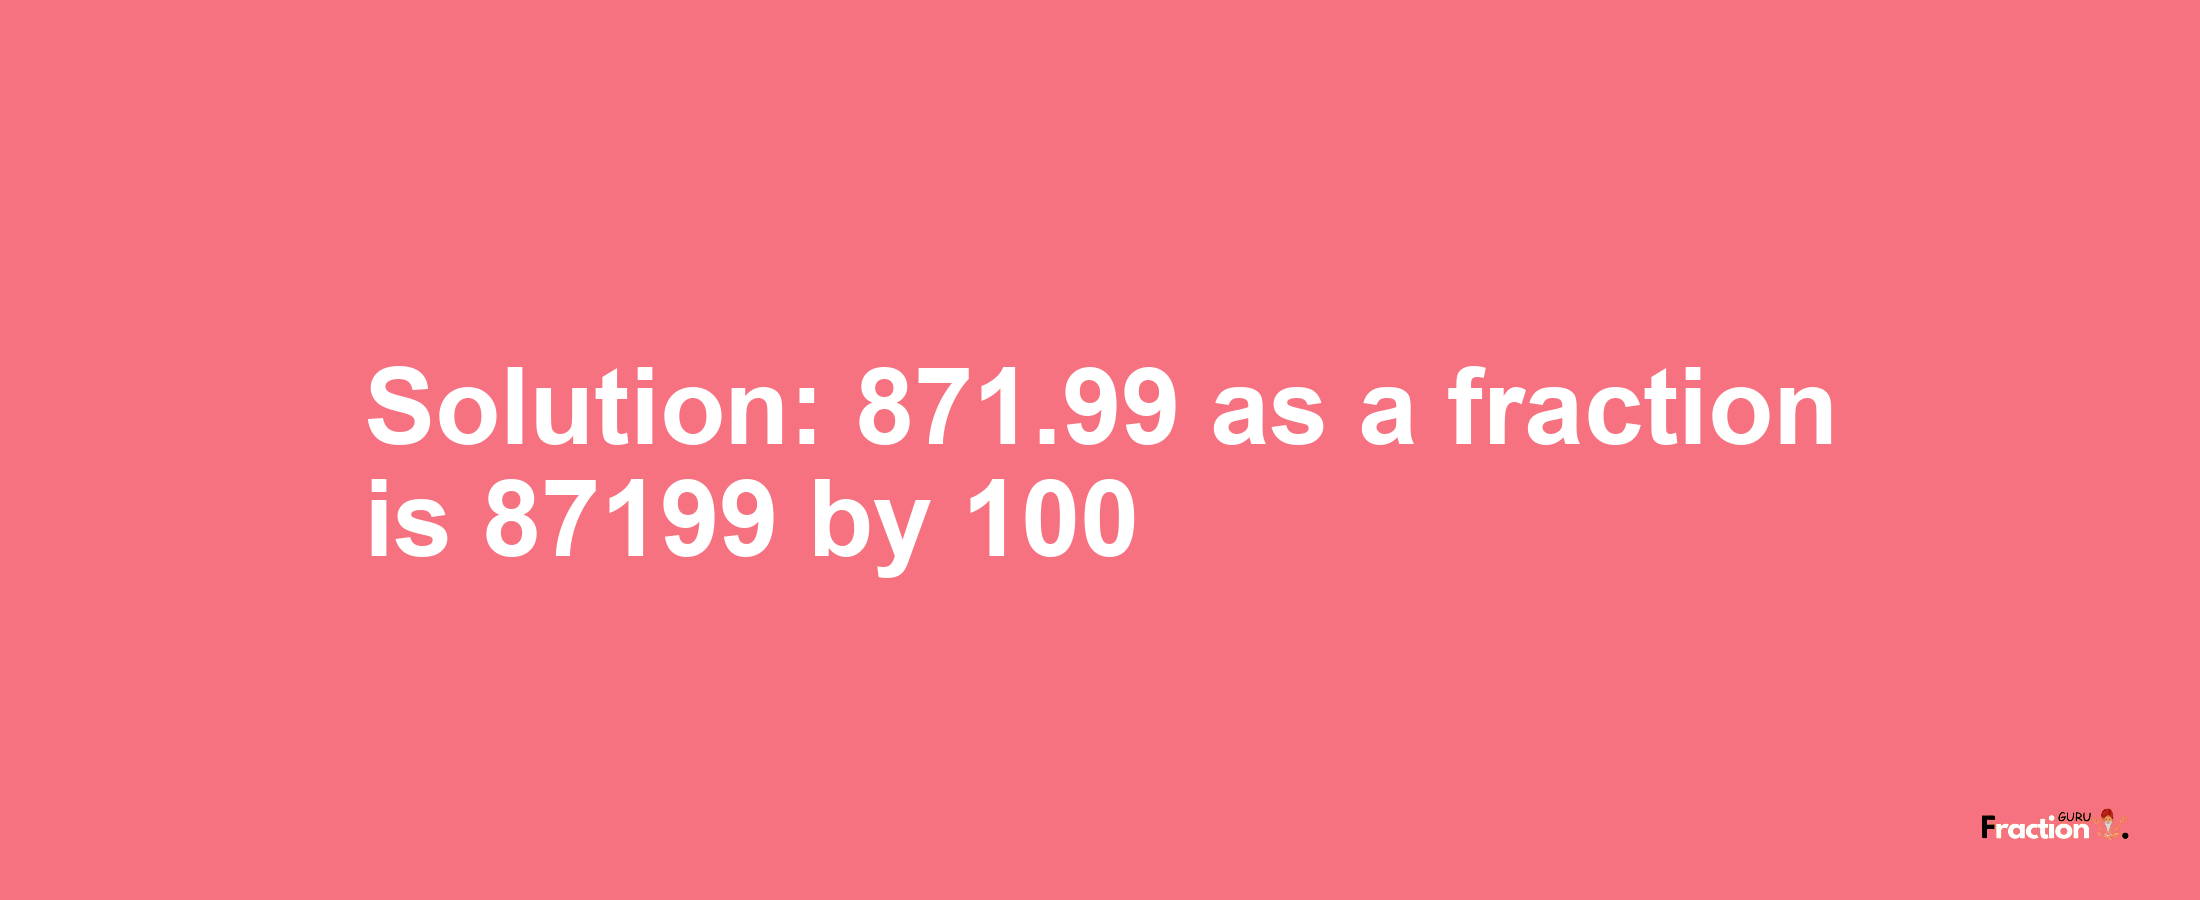 Solution:871.99 as a fraction is 87199/100